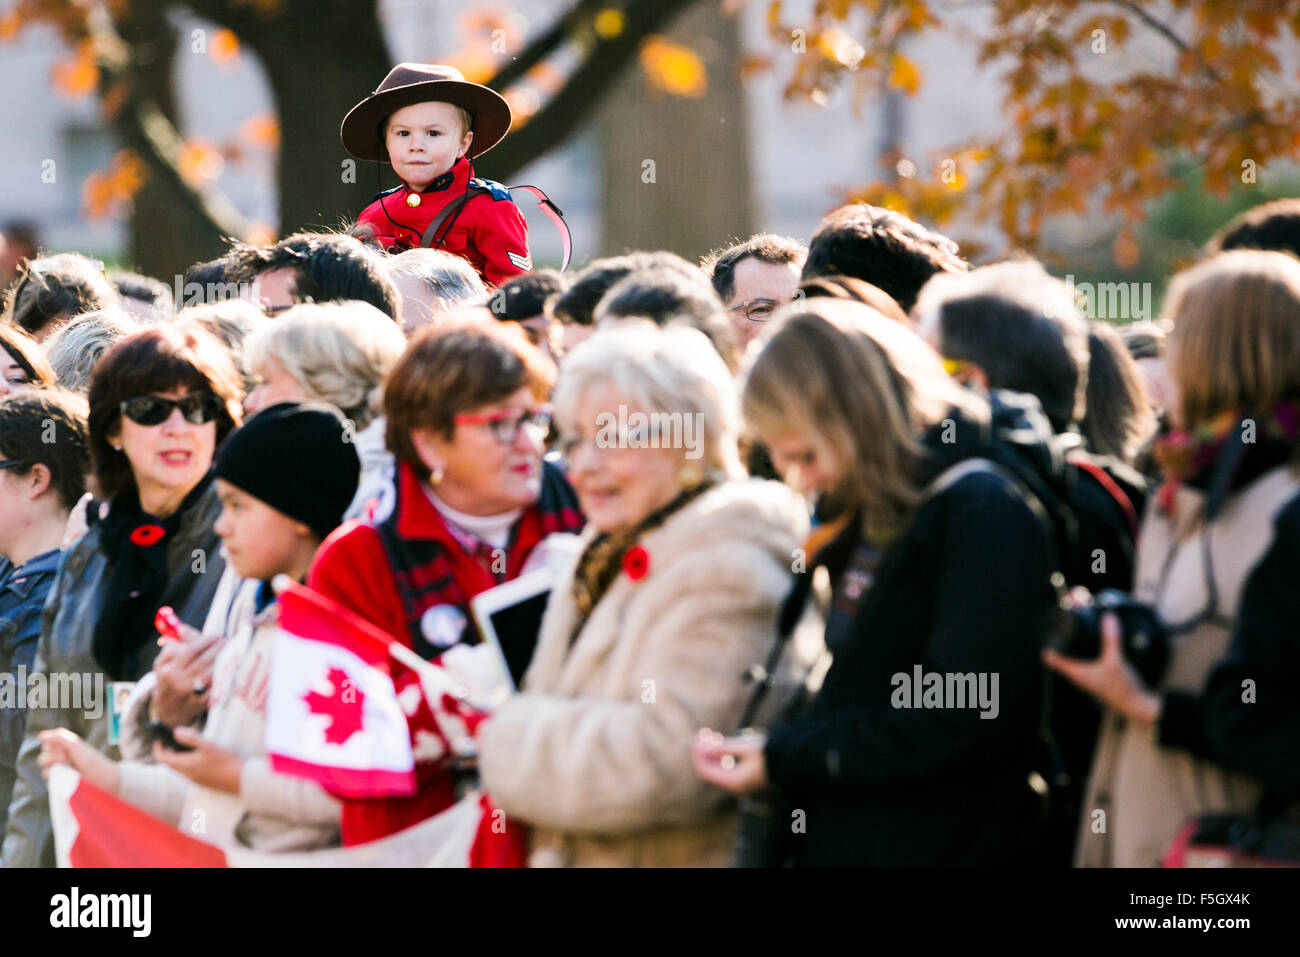 (151104) -- OTTAWA, Nov. 4, 2015 (Xinhua) -- Canadian people wait for the newly elected Prime Minister Justin Trudeau prior to his swearing in ceremony at Rideau Hall in Ottawa, Canada, Nov. 4, 2015. Justin Trudeau was sworn in as Canada's 23rd prime minister and named a 31-member cabinet here Wednesday. (Xinhua/Chris Roussakis) Stock Photo